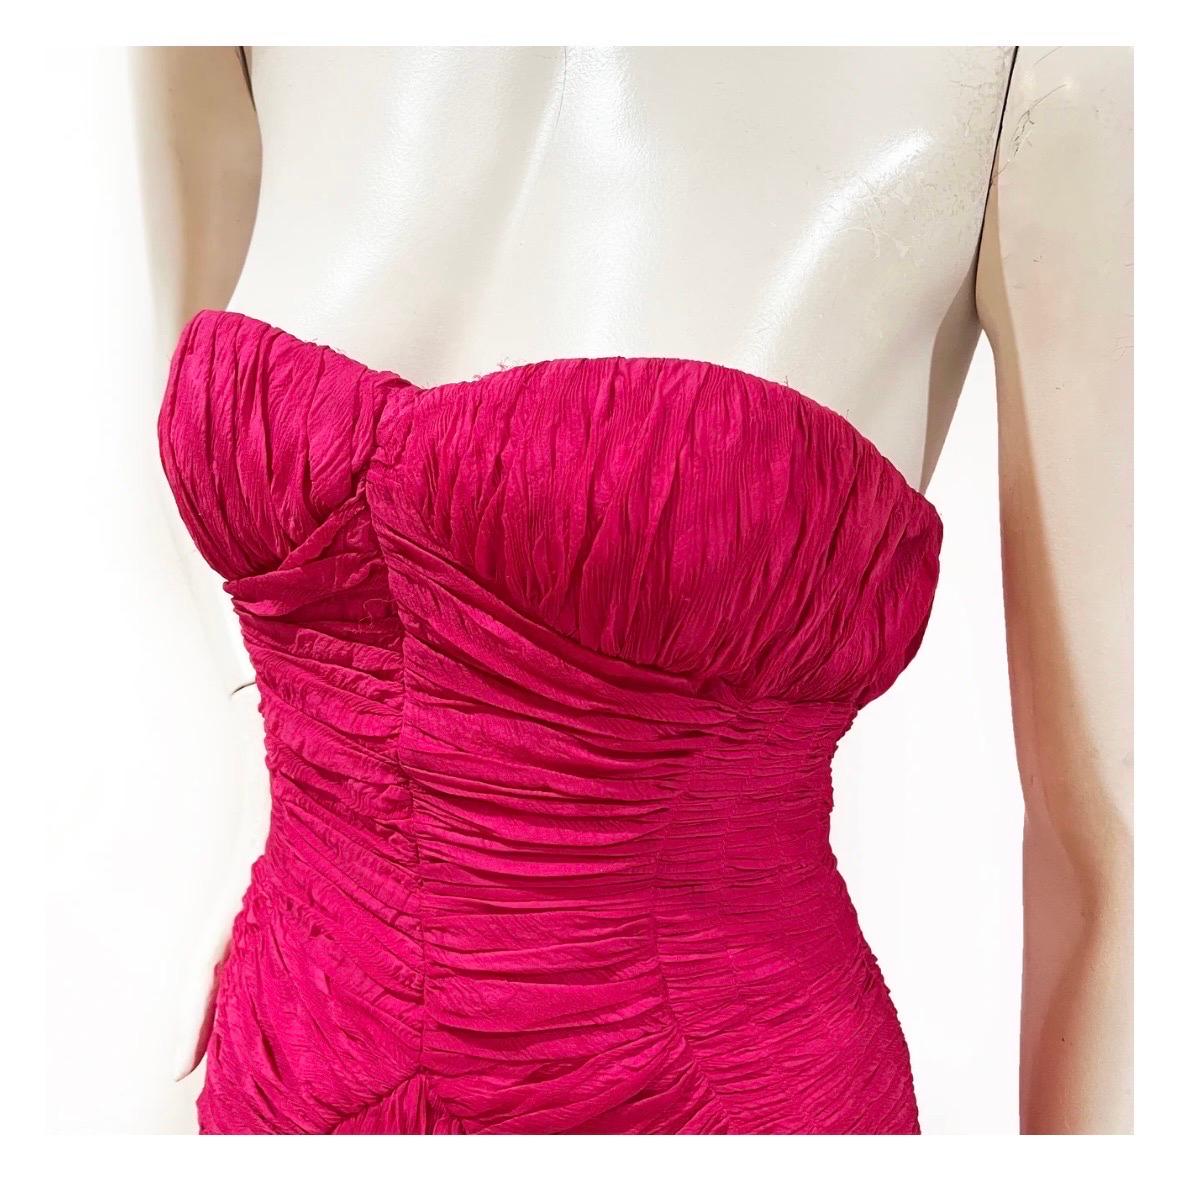 Magenta designer mini dress by John Galliano for Christian Dior
Spring 2009 Ready-To-Wear
Made in France
Strapless
Sweetheart neckline
Interior corset 
Ruched throughout bodice
Ruffled skirt  
Back zipper closure 
100% silk, 100% silk